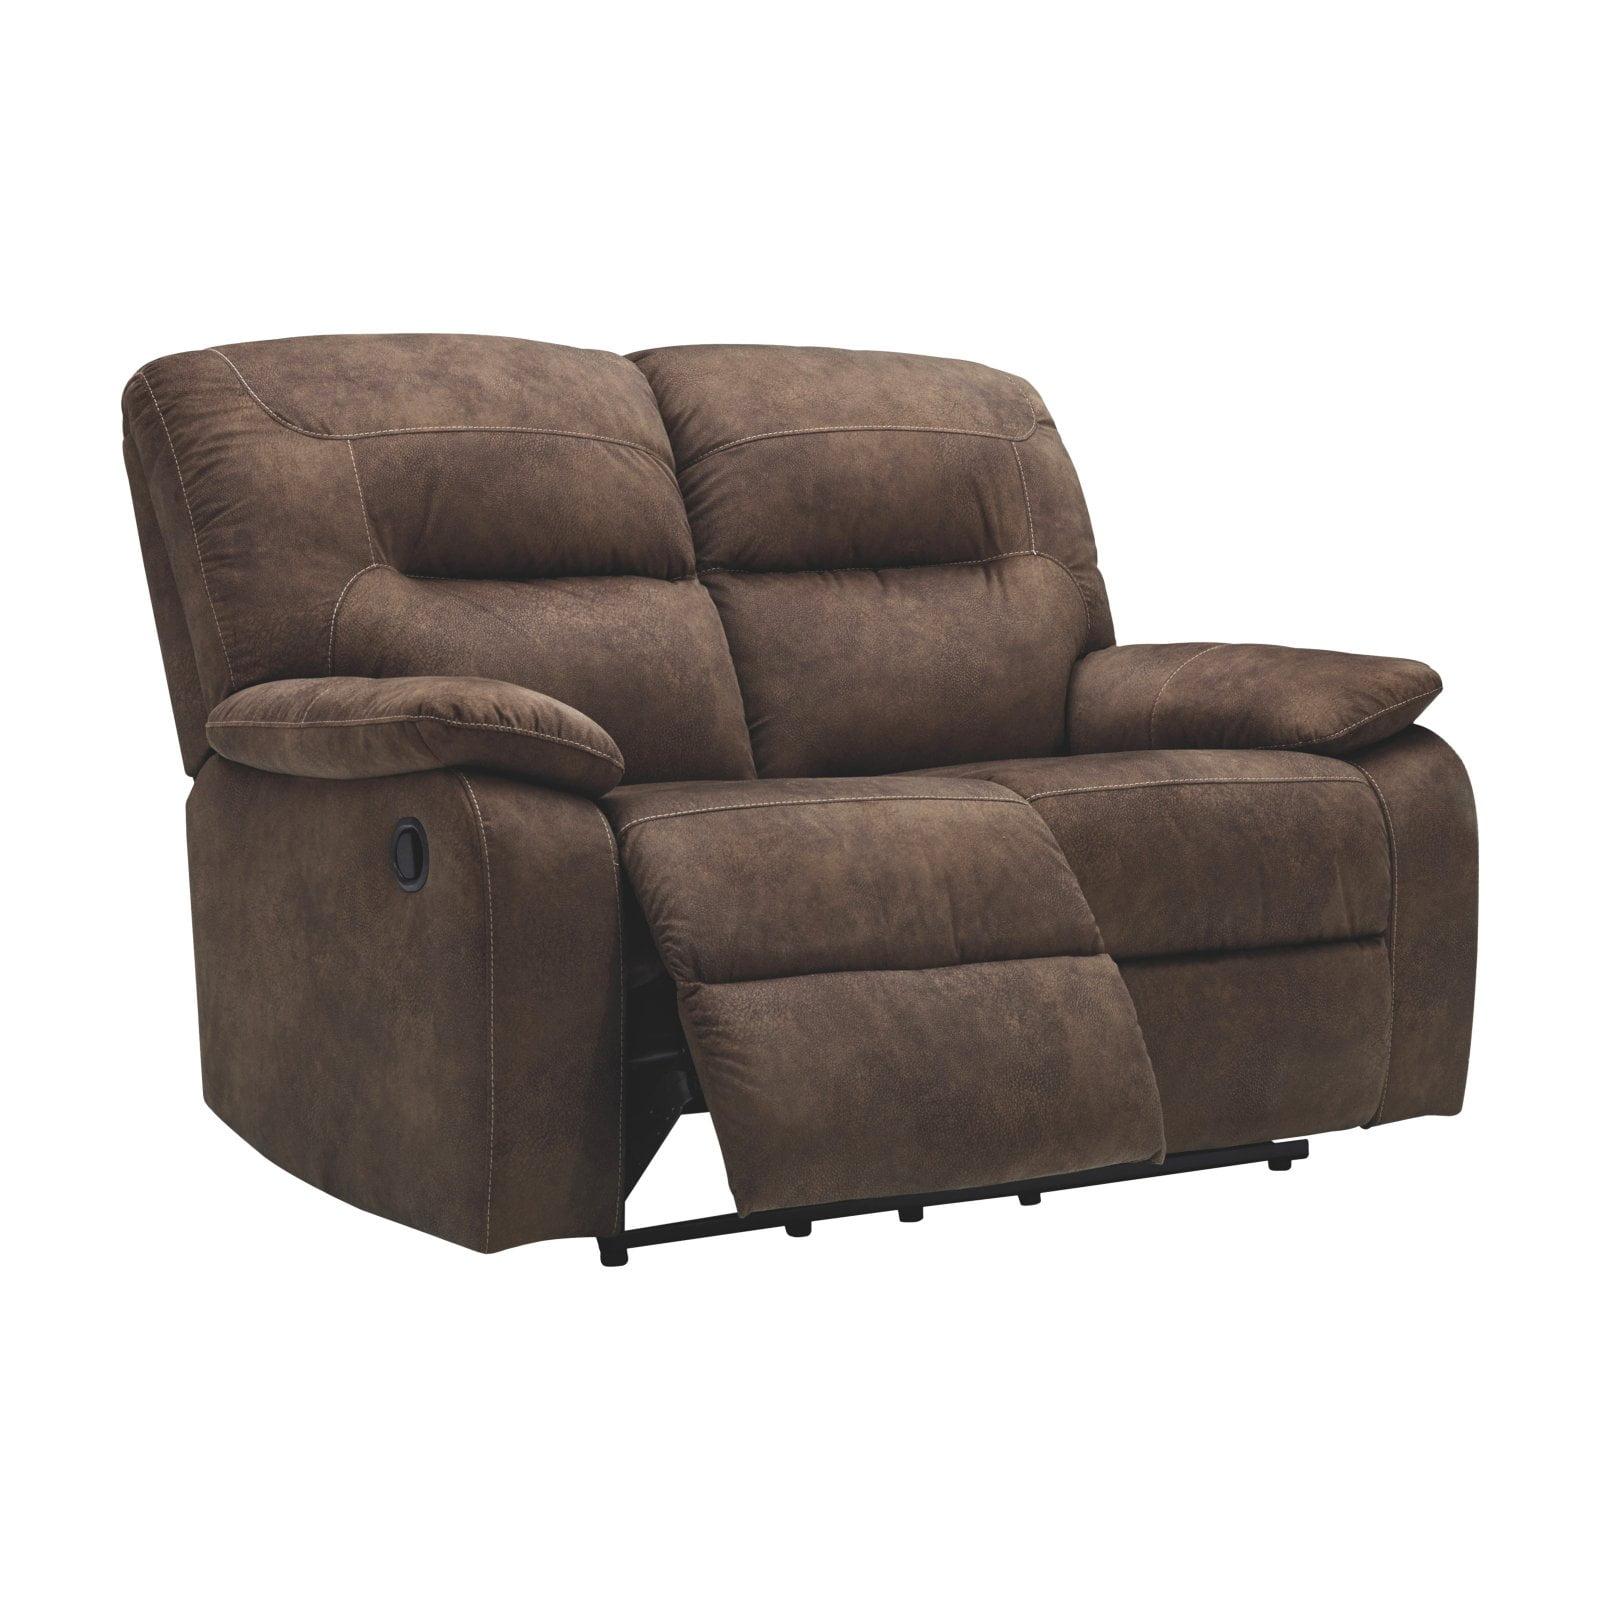 Compact Coffee Brown Microfiber Reclining Loveseat with Pillow Back